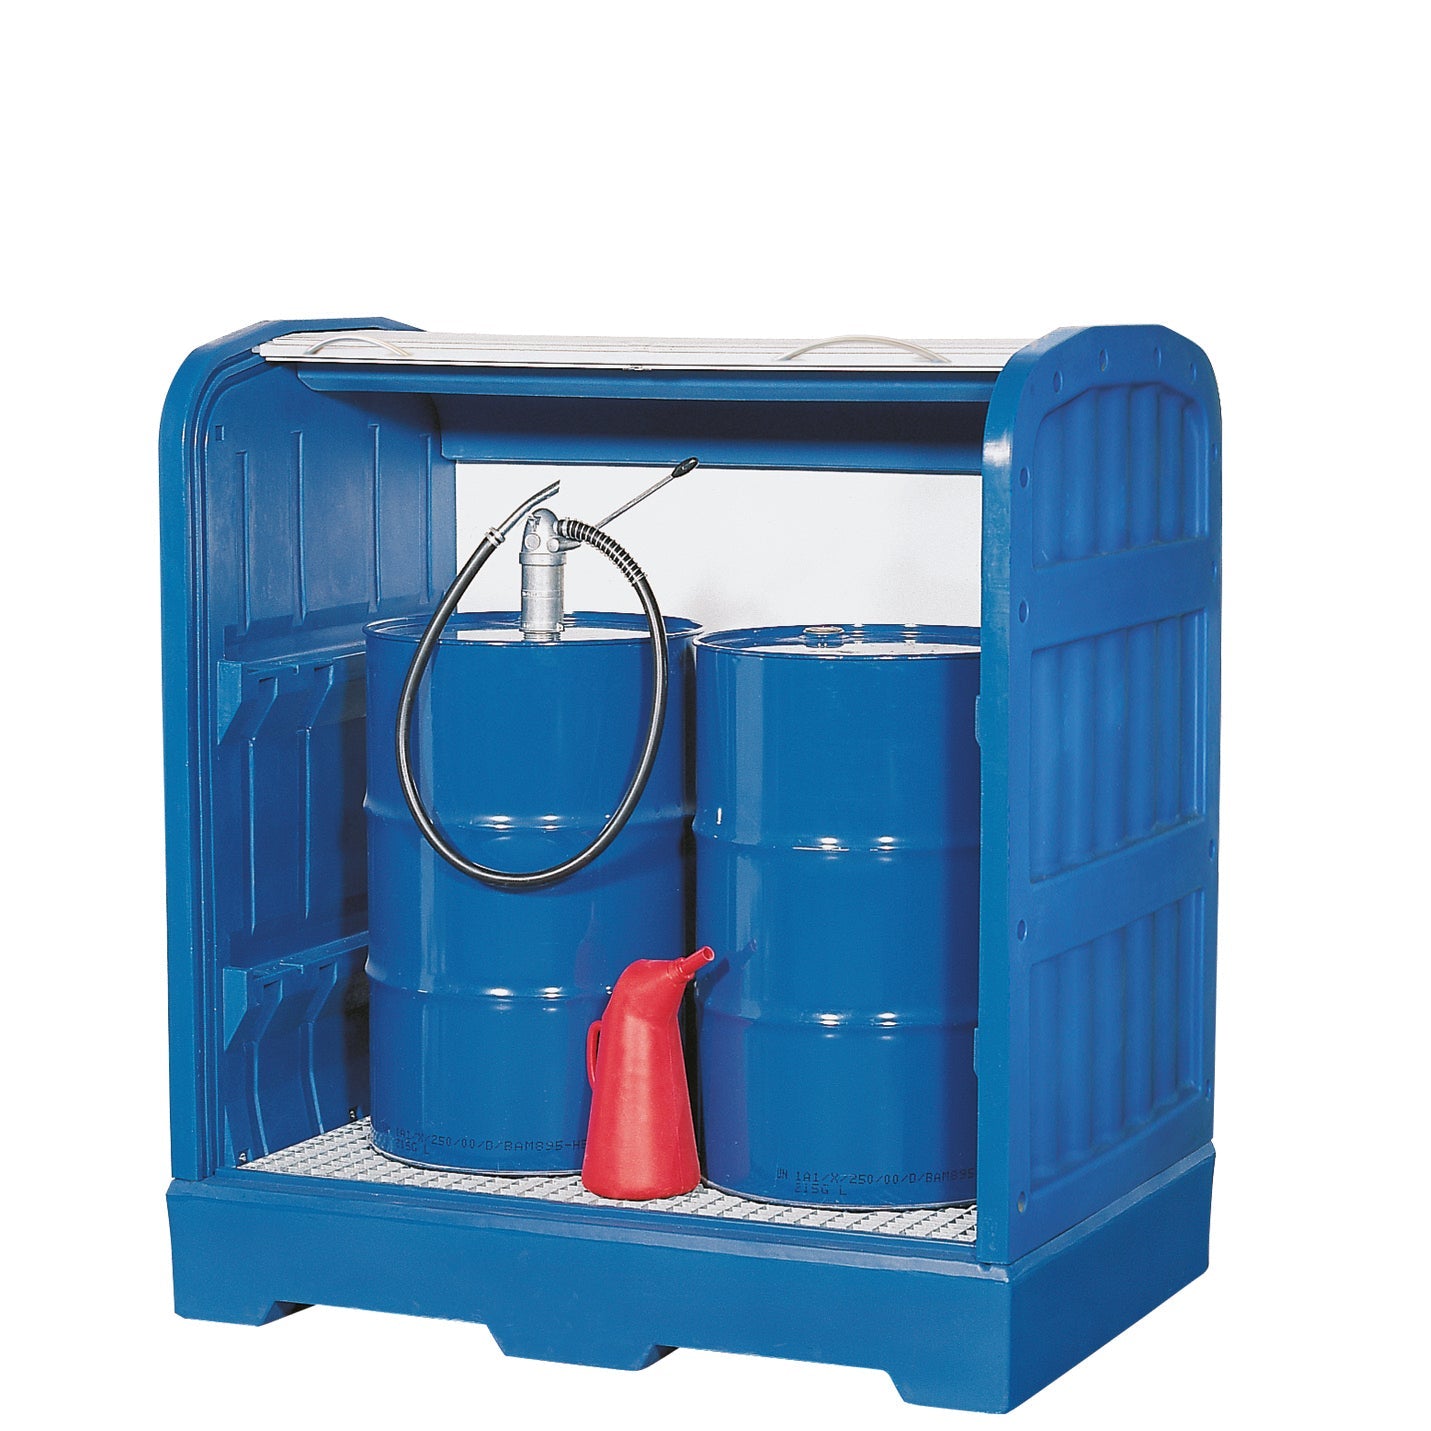 Depot accessible by forklift PE-LD with galvanised grid 1560x1030x1670, polyethylen (low density)